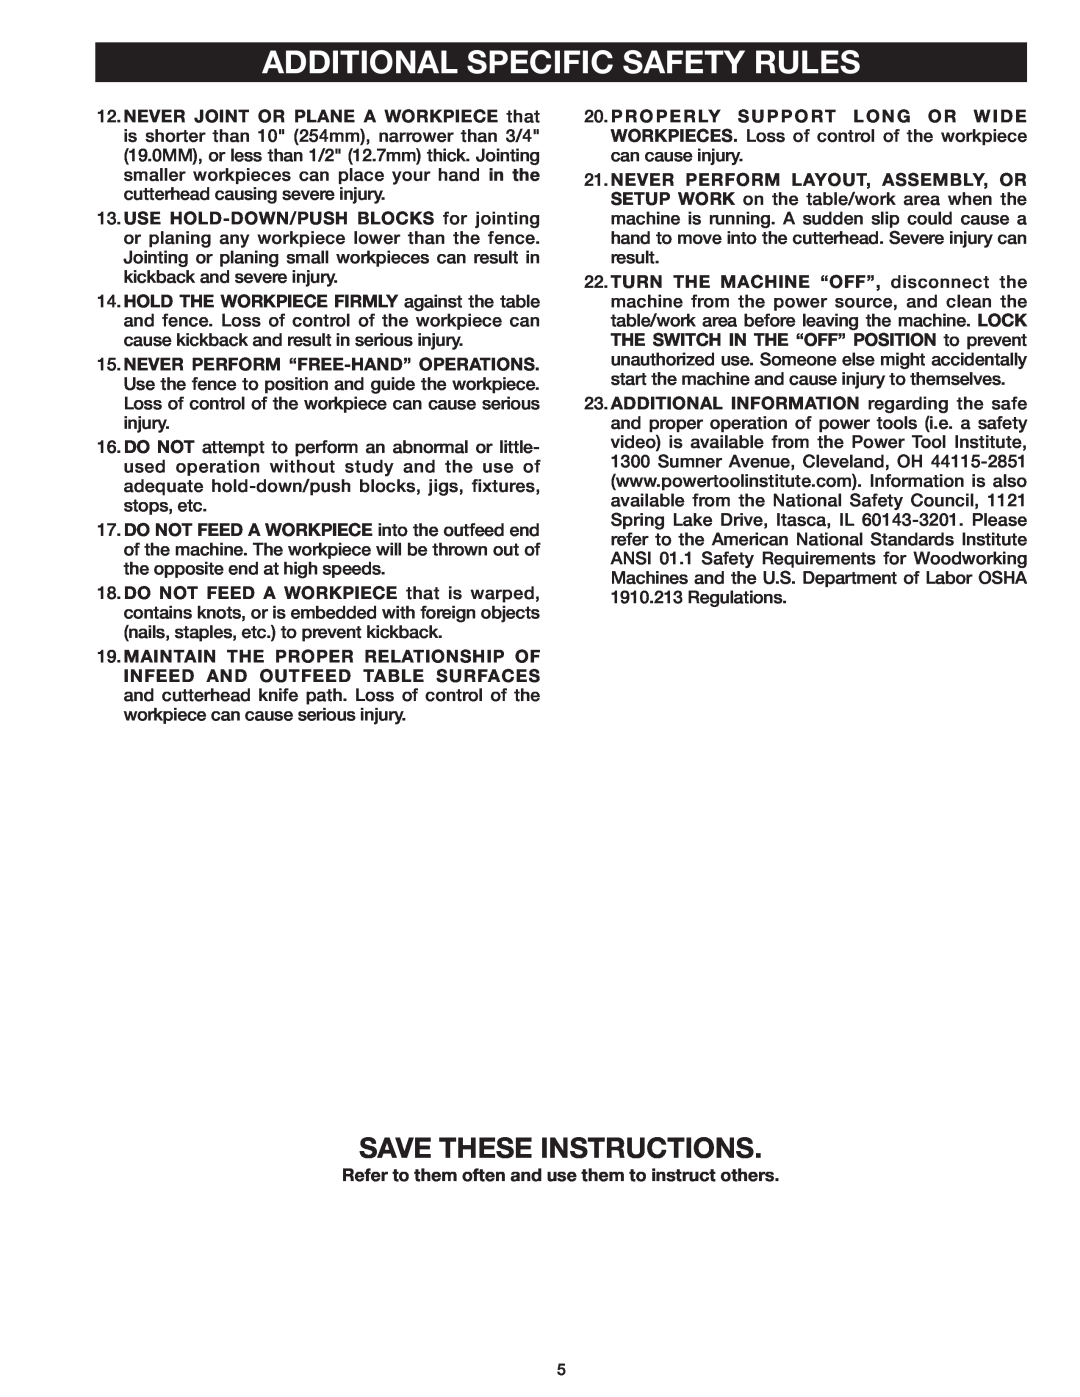 Delta 37-071 instruction manual Save These Instructions, Additional Specific Safety Rules 